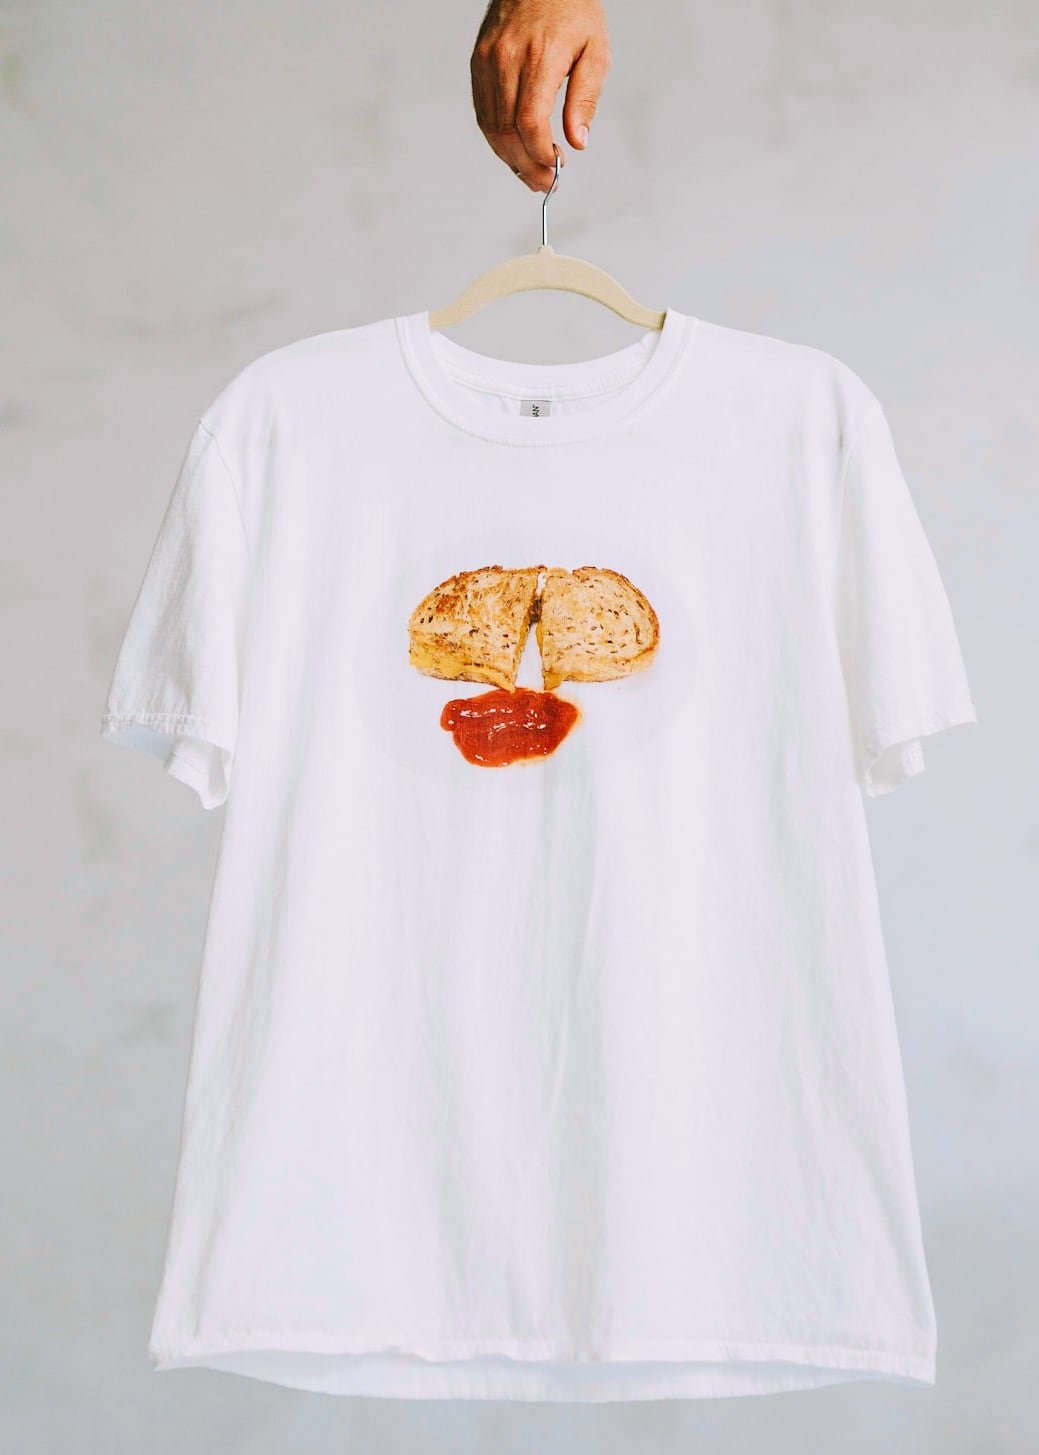 The Grilled Cheese and Ketchup Sandwich T-Shirt